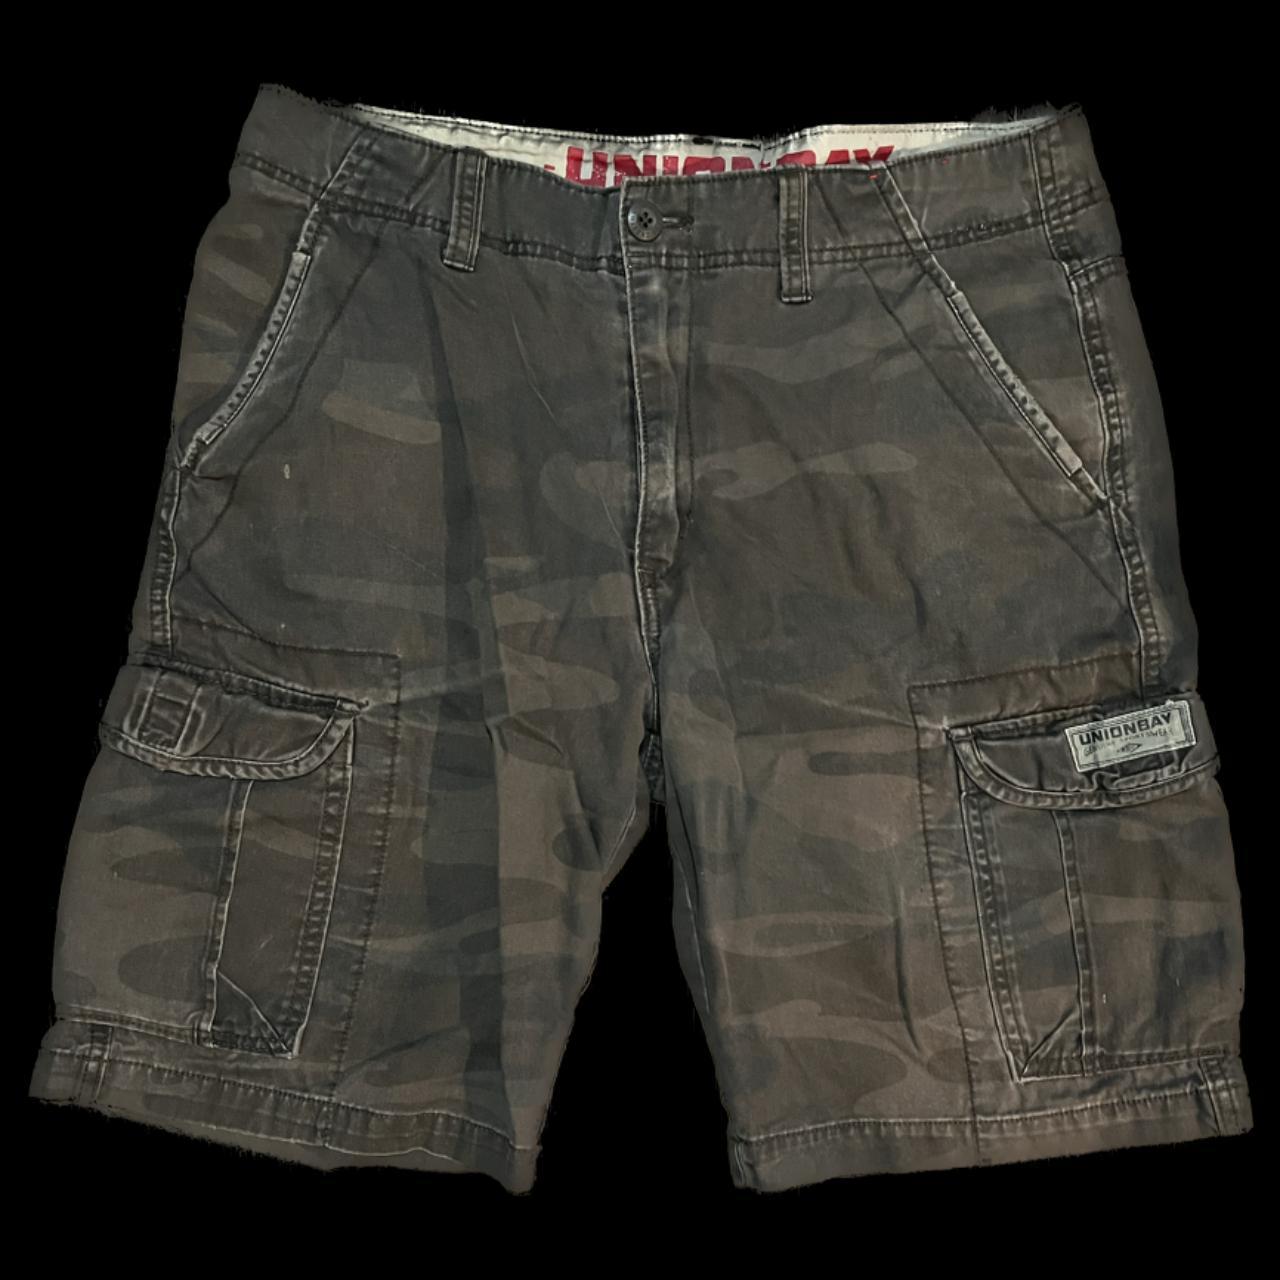 Camo Union Bay Cargo Shorts These shorts have a... - Depop